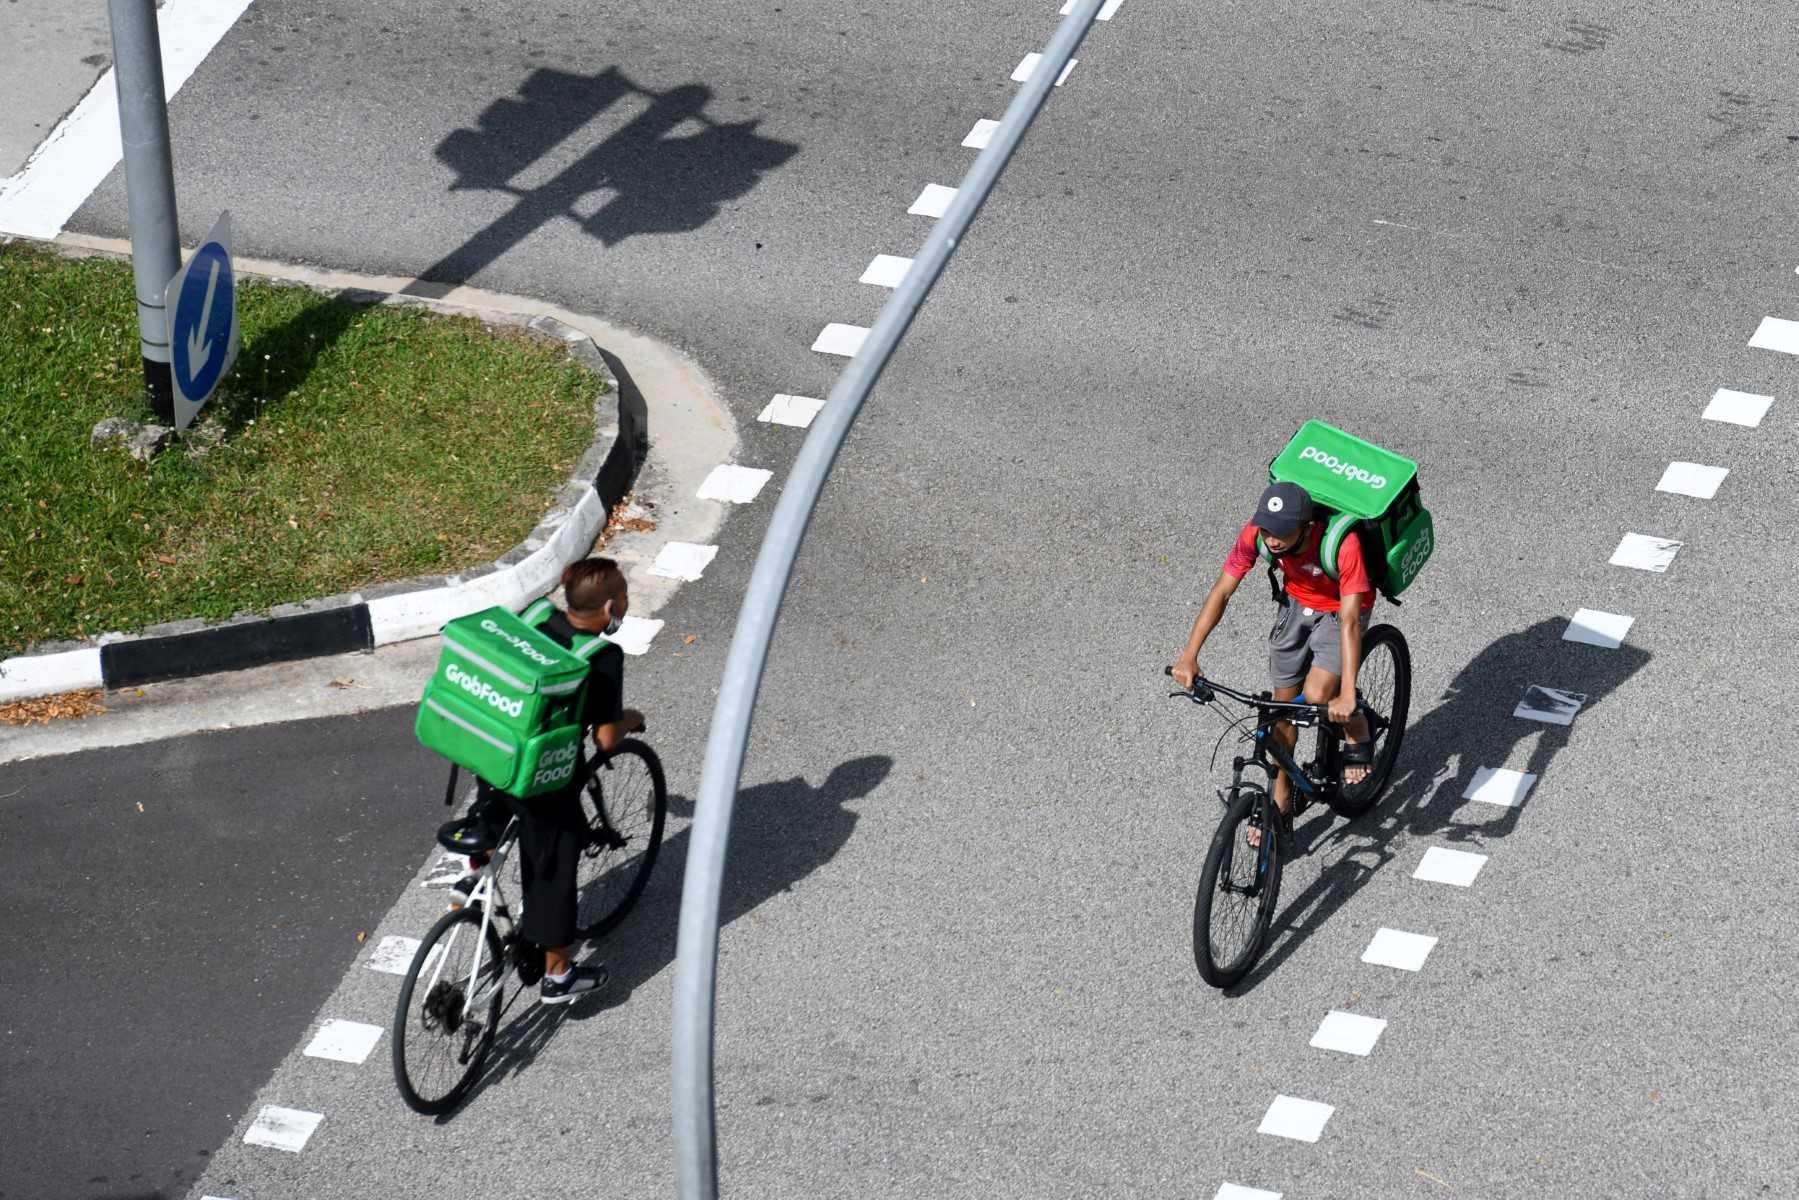 Grab delivery cyclists ride past eact other in Singapore on April 20, 2020. Photo: AFP